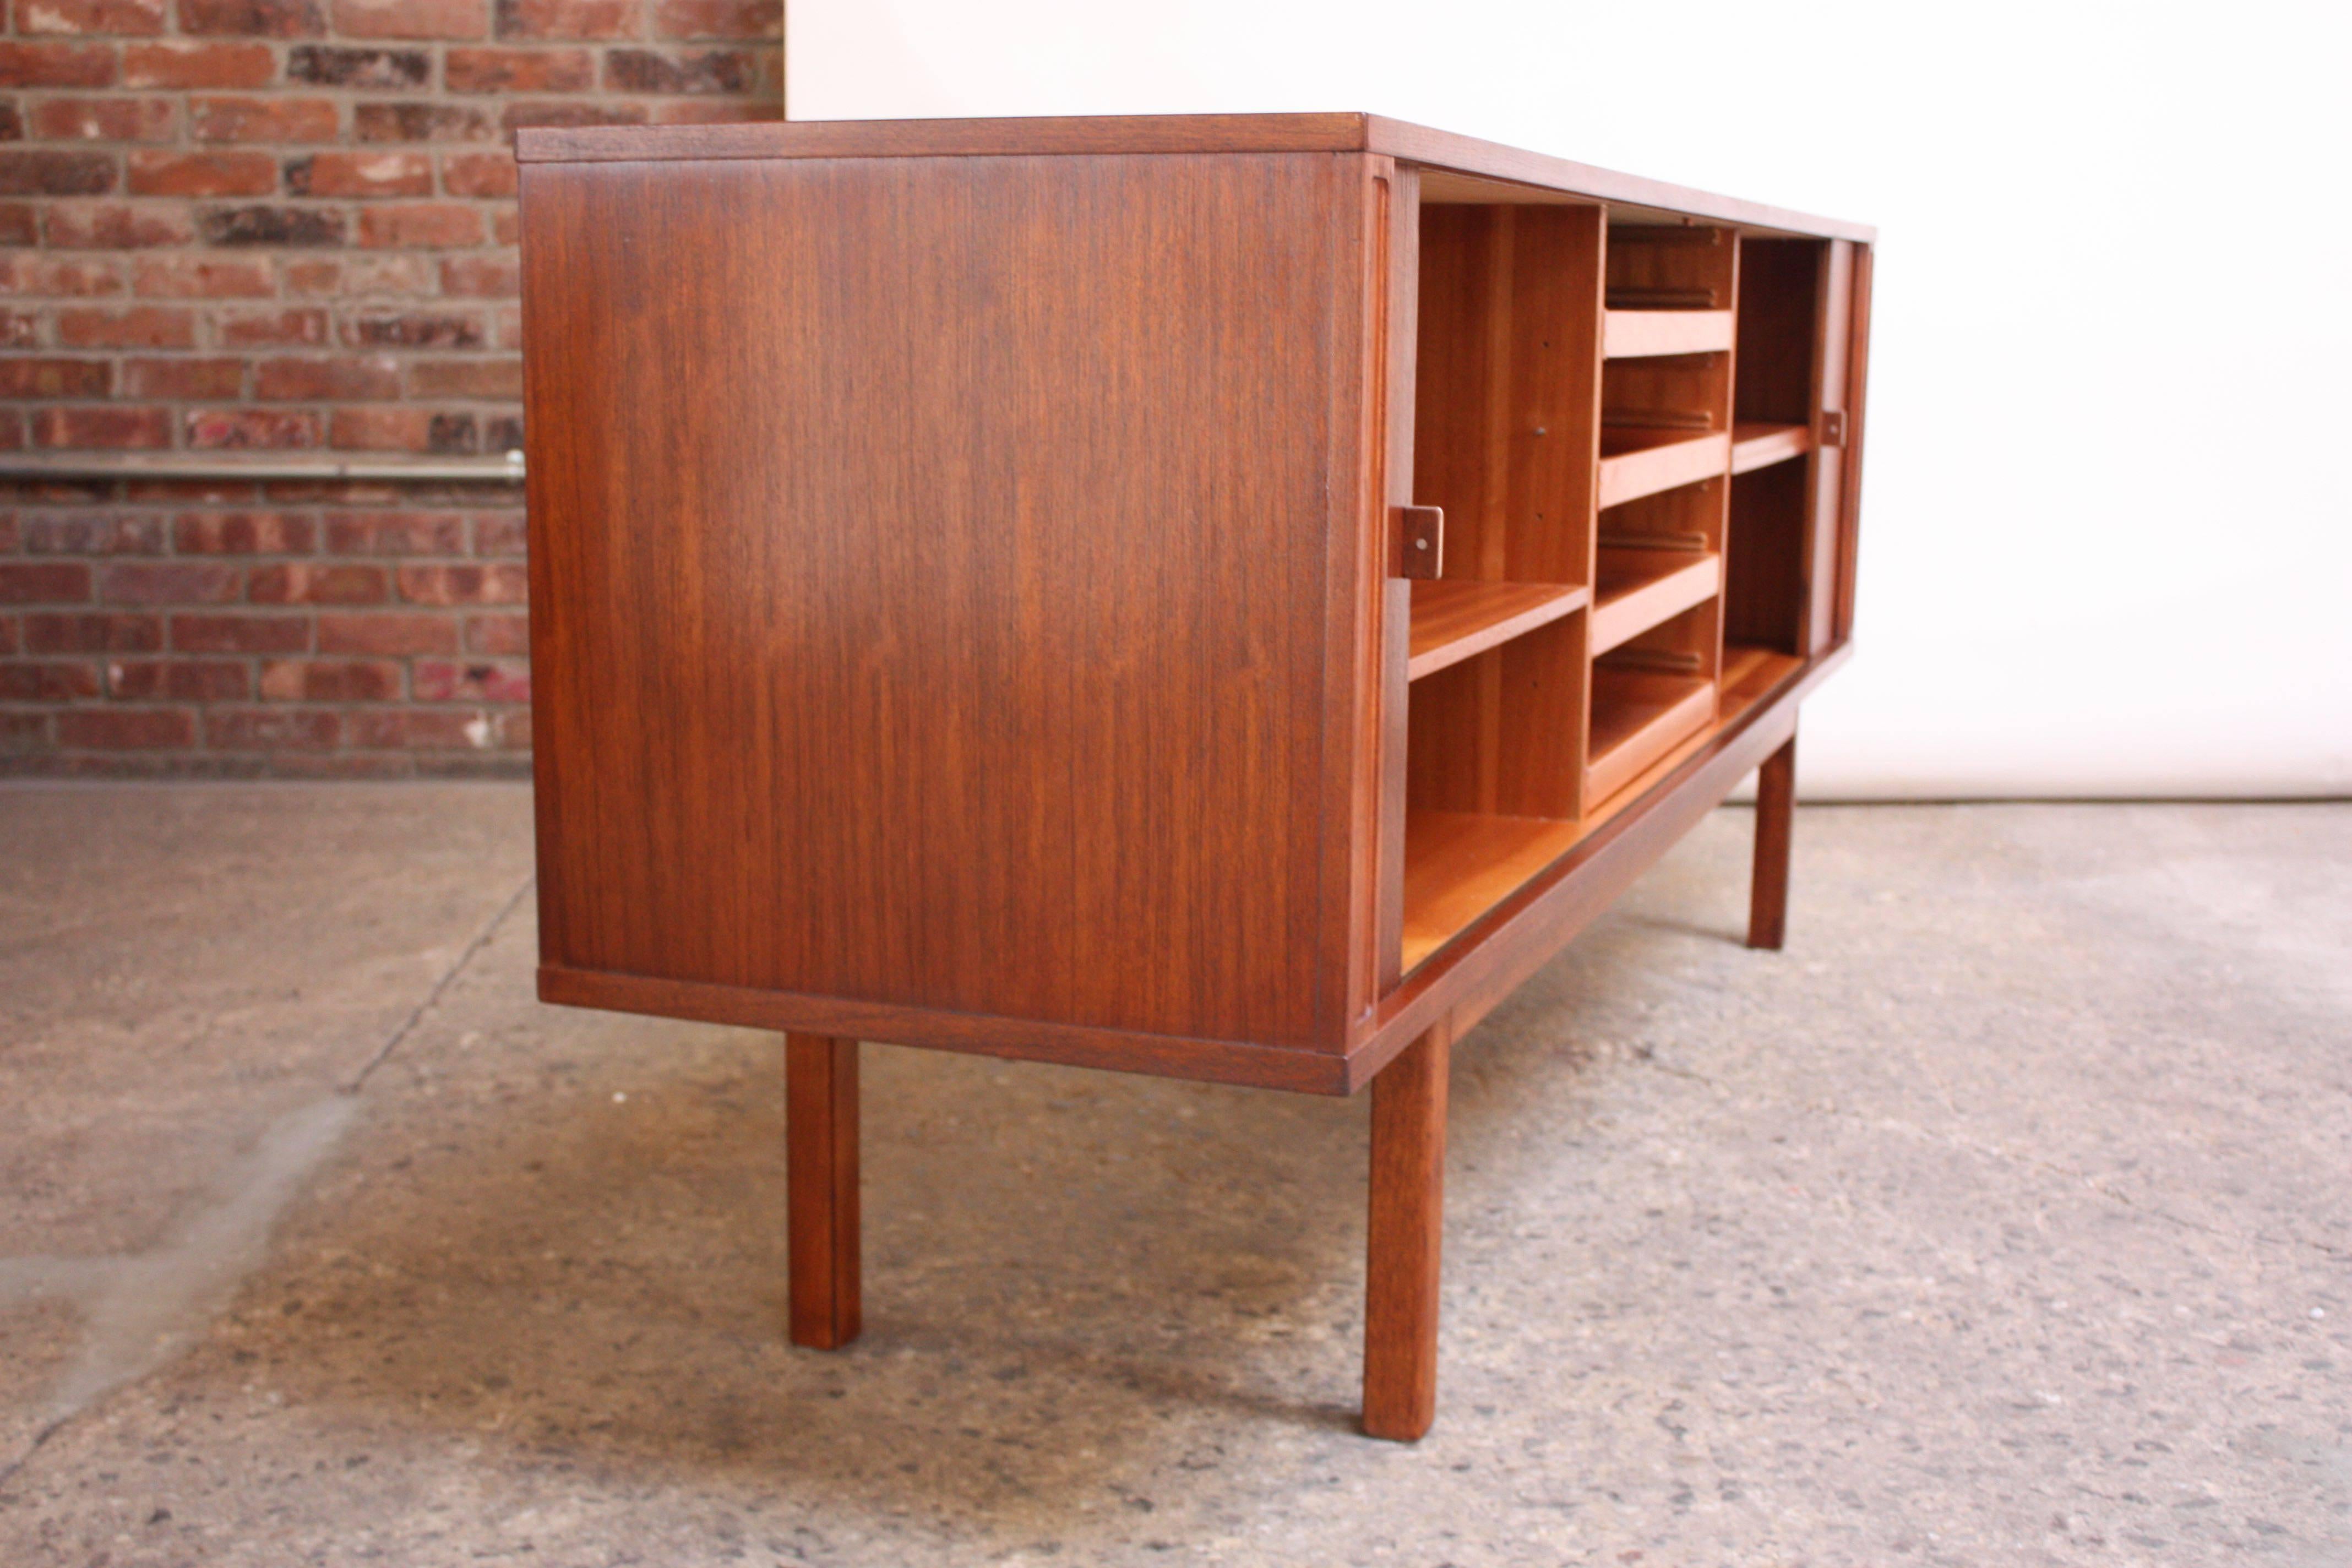 This teak sideboard was designed and manufactured by Peter Løvig Nielsen in 1976. The tambour doors slide open to reveal three sections: Open storage to the left and right divided by a total of three adjustable shelves and four centre drawers (one